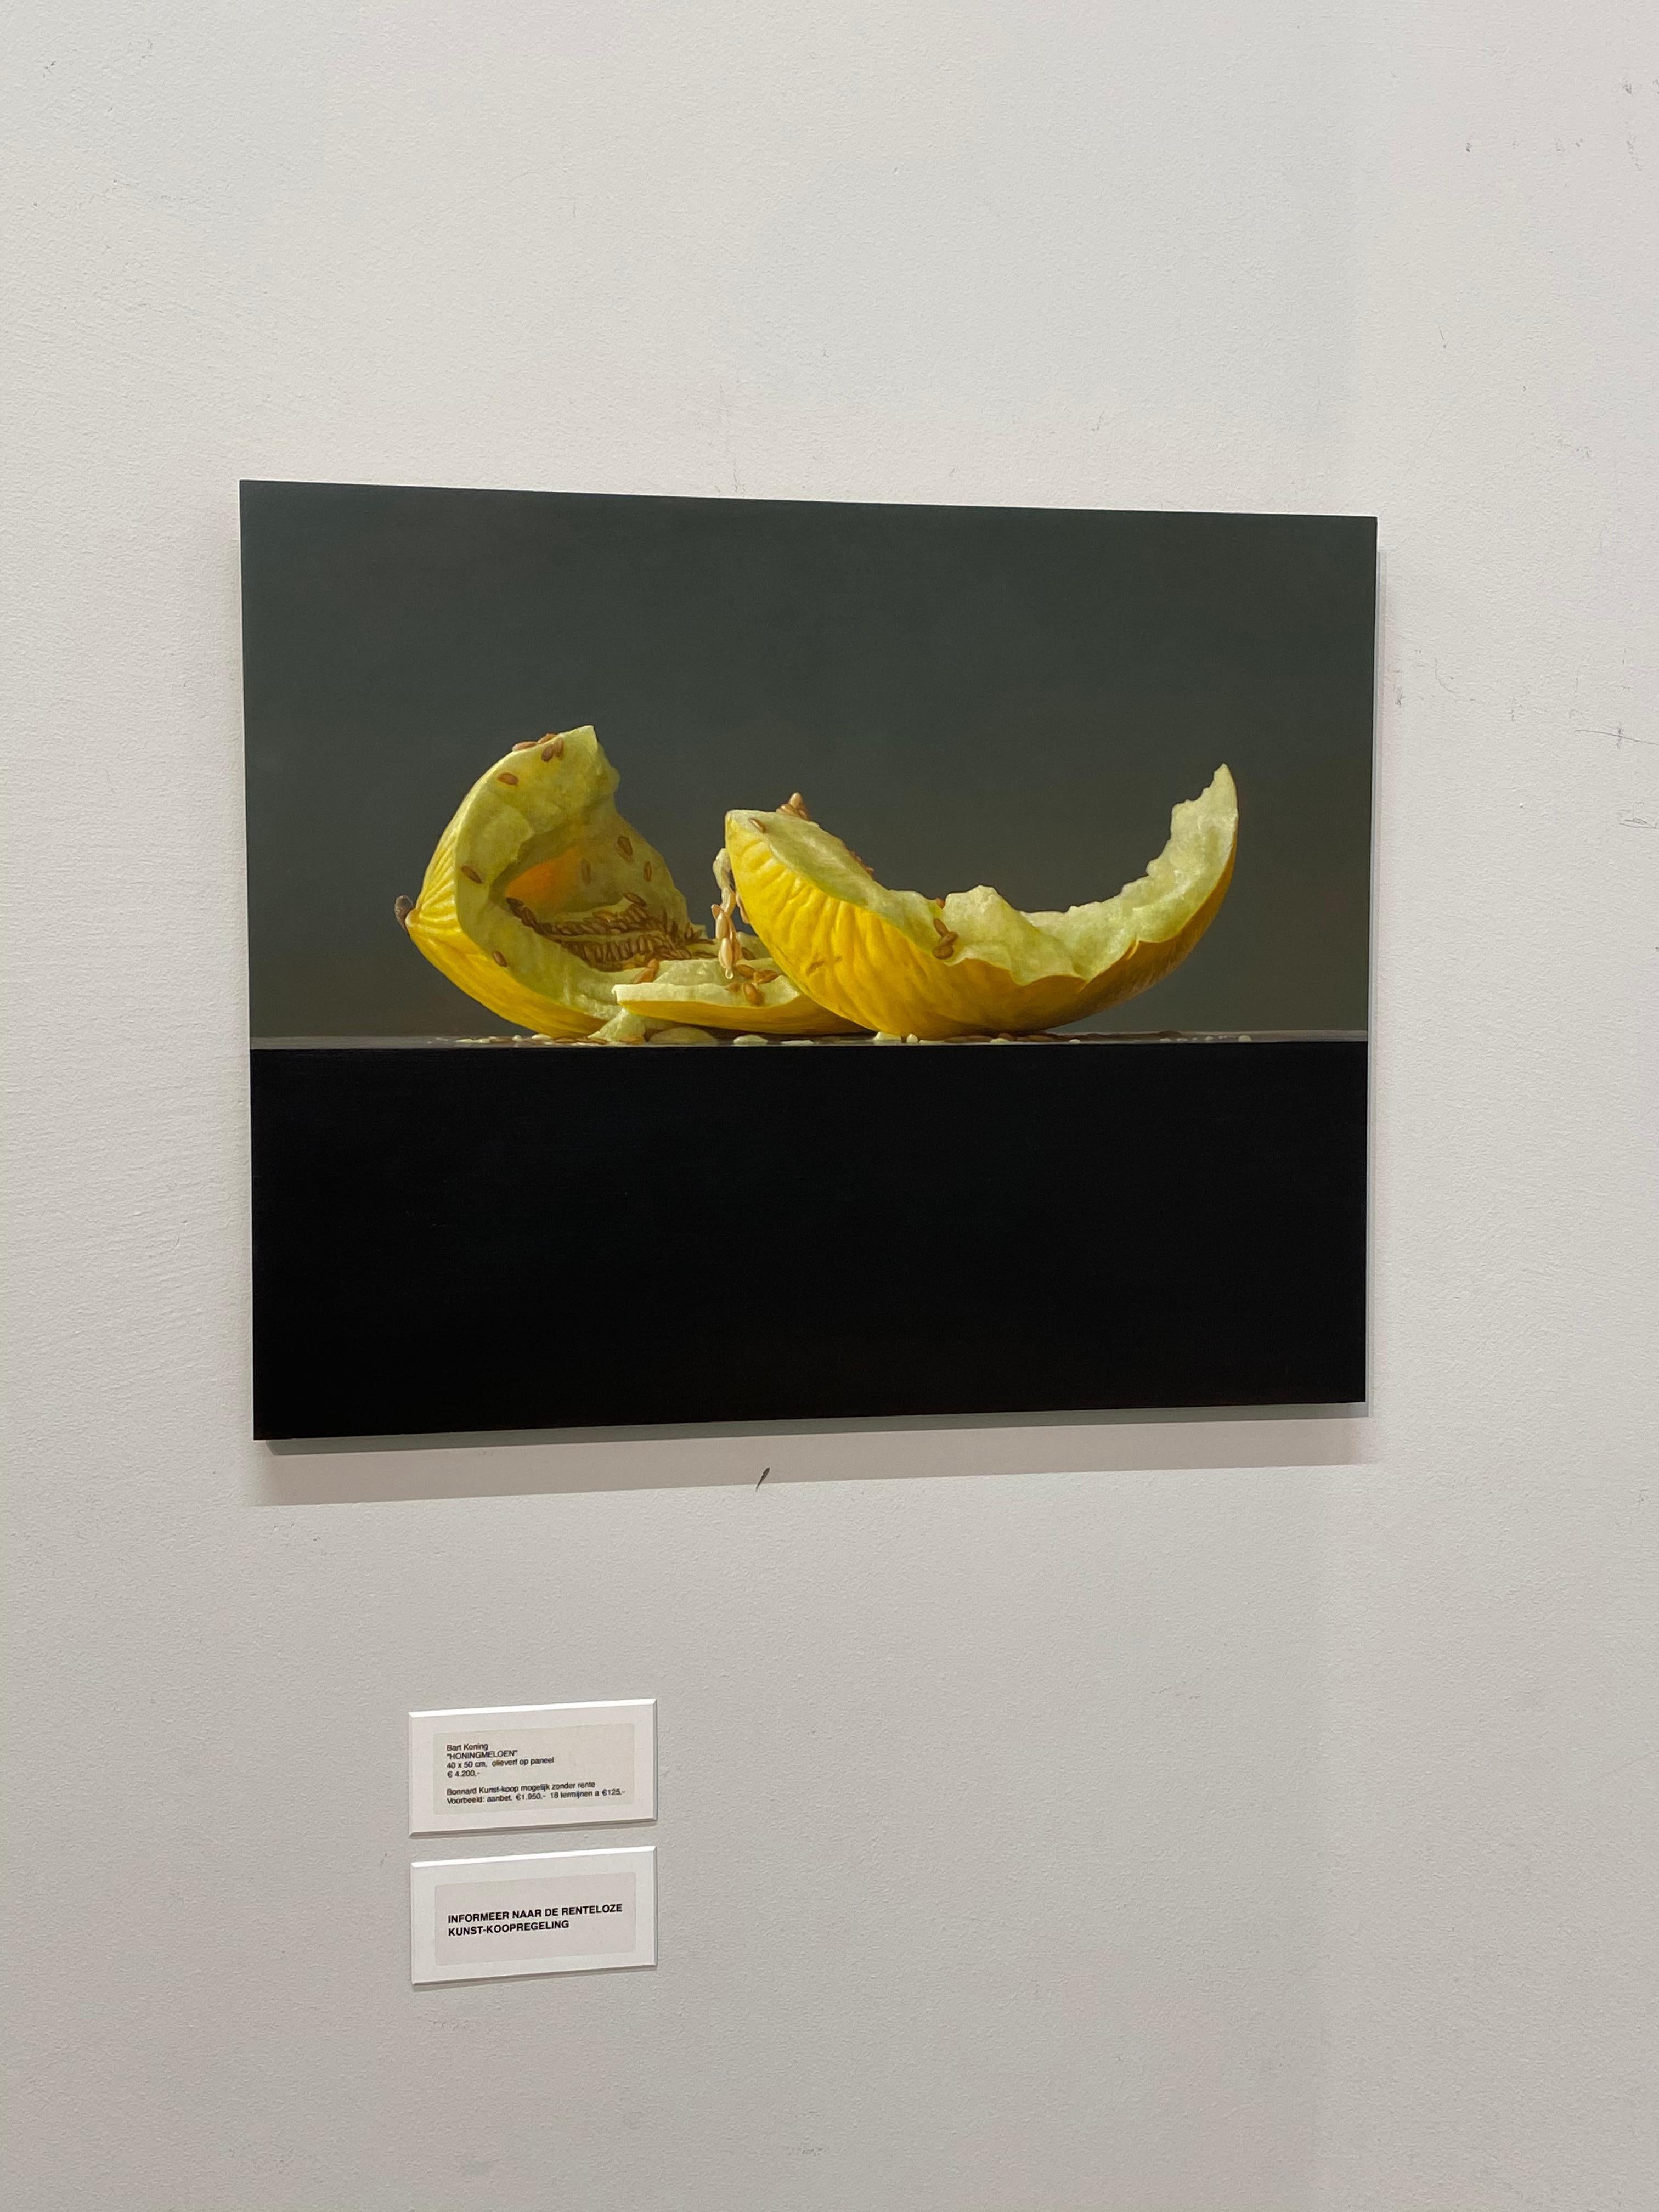 Honeydew Melo- 21st Century Still-life  painting of a yellow Melon - Painting by Bart Koning